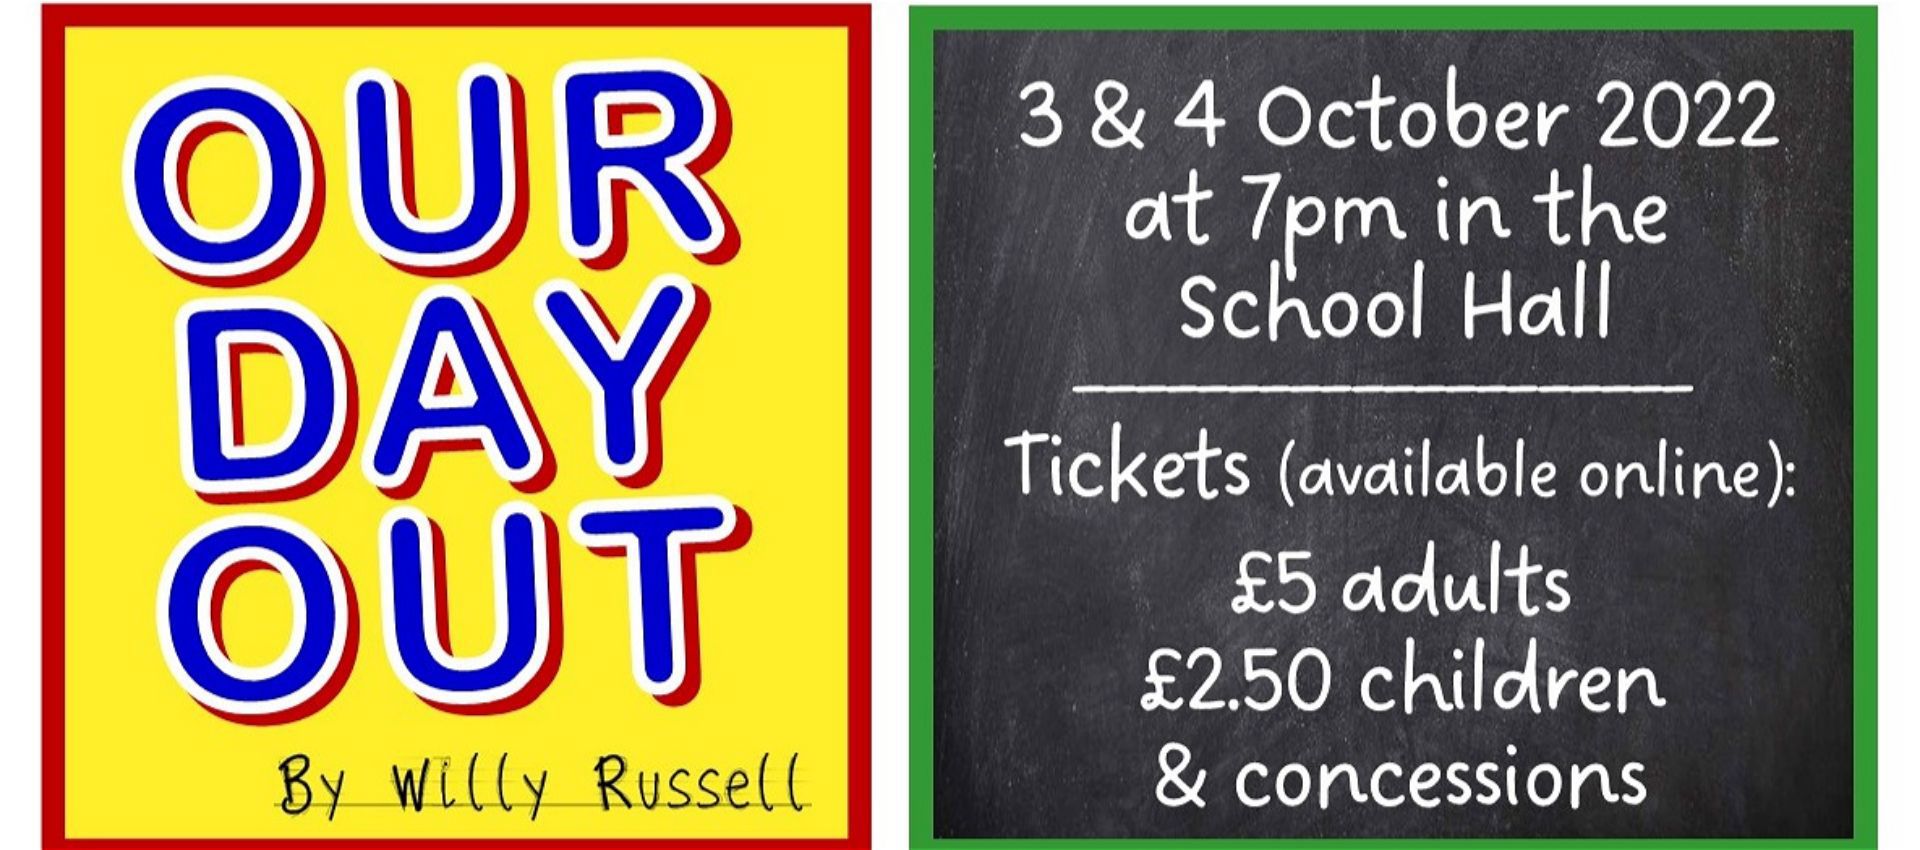 Tickets Available for Next School Production